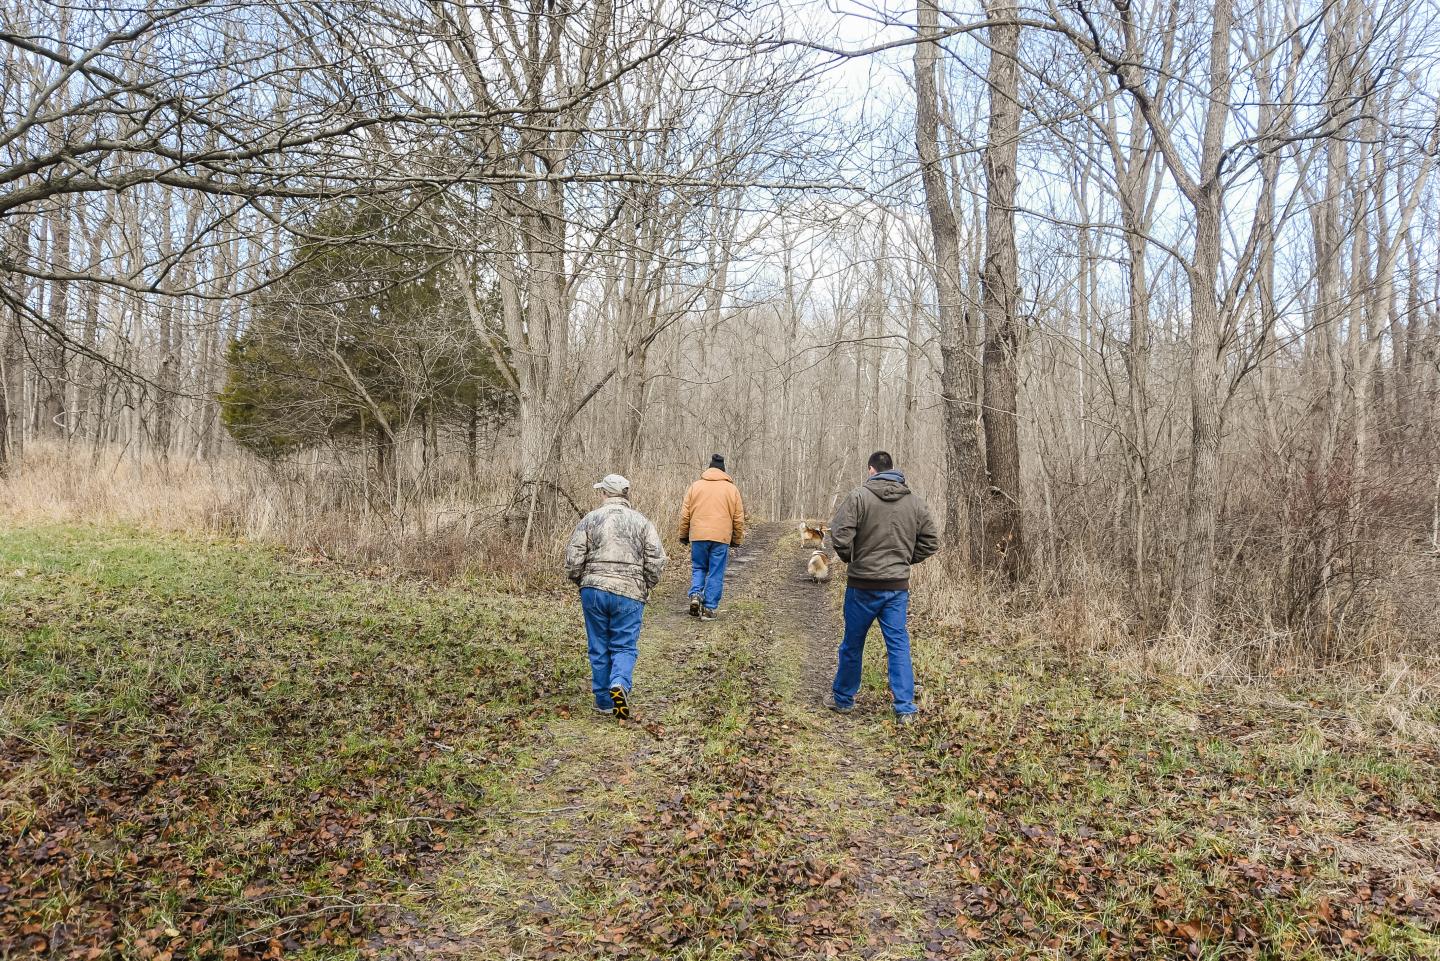 Peggy and Allen Royer, who own Wagoner Christmas Tree Farm in Putnam County, Indiana, walk through the timberland that surrounds the farm with Indiana NRCS District Conservationist Thomas Perkins Dec. 14, 2020.